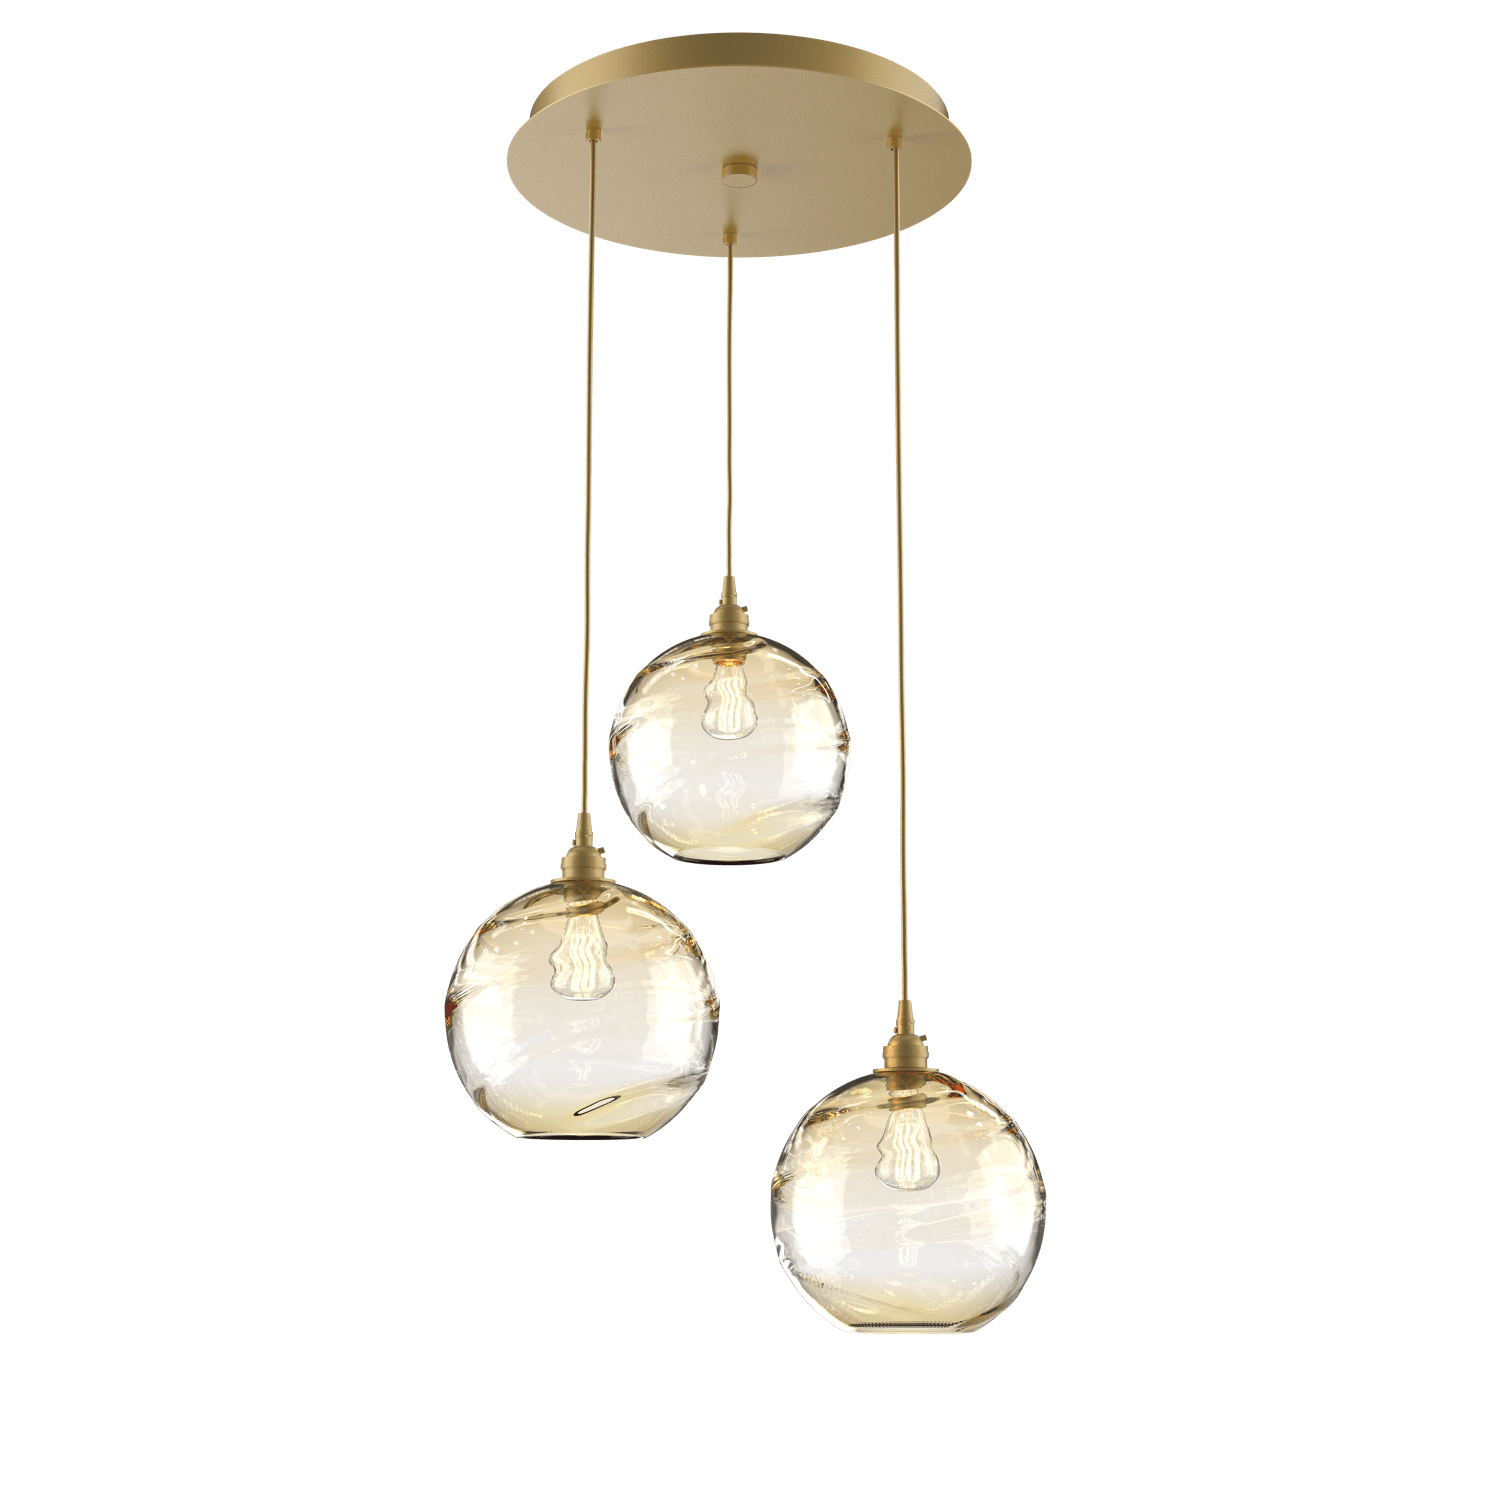 CHB0047-03-GB-OA-Hammerton-Studio-Optic-Blown-Glass-Terra-3-light-round-pendant-chandelier-with-gilded-brass-finish-and-optic-amber-blown-glass-shades-and-incandescent-lamping